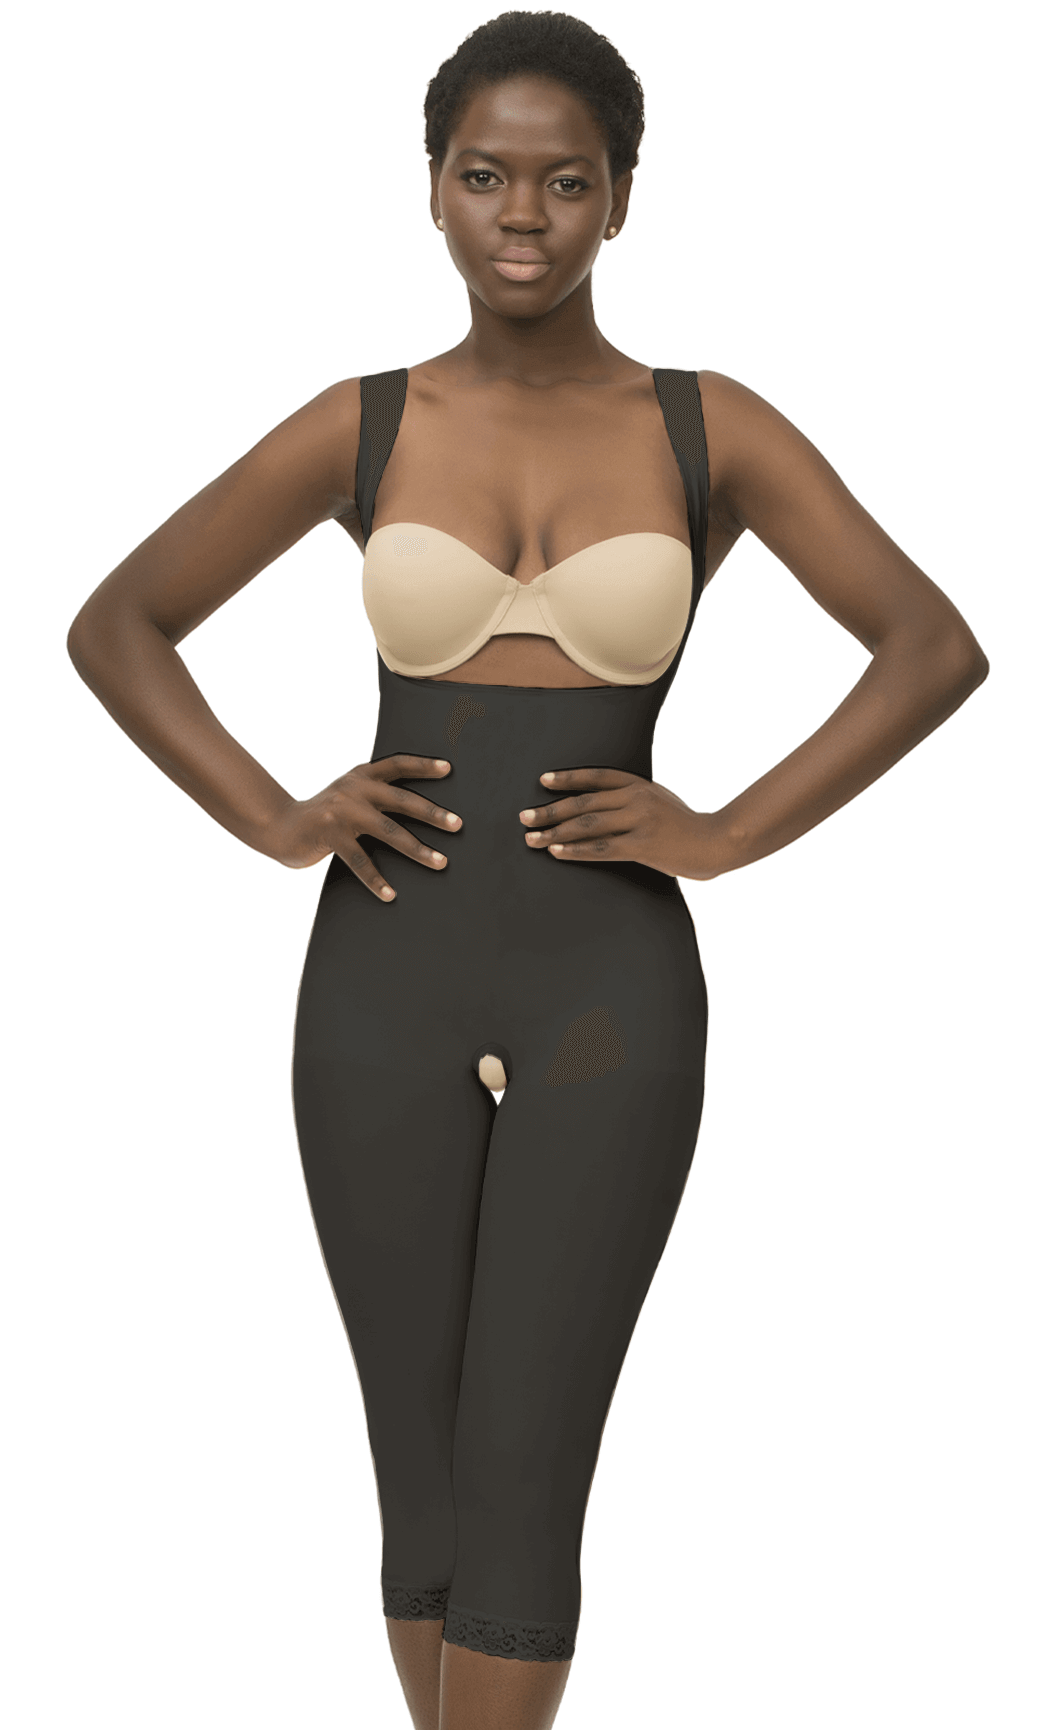 2nd Stage Body Suit Below Knee Length with Suspender Open Buttocks Enhancing  Compression Girdle (BE06-BK)